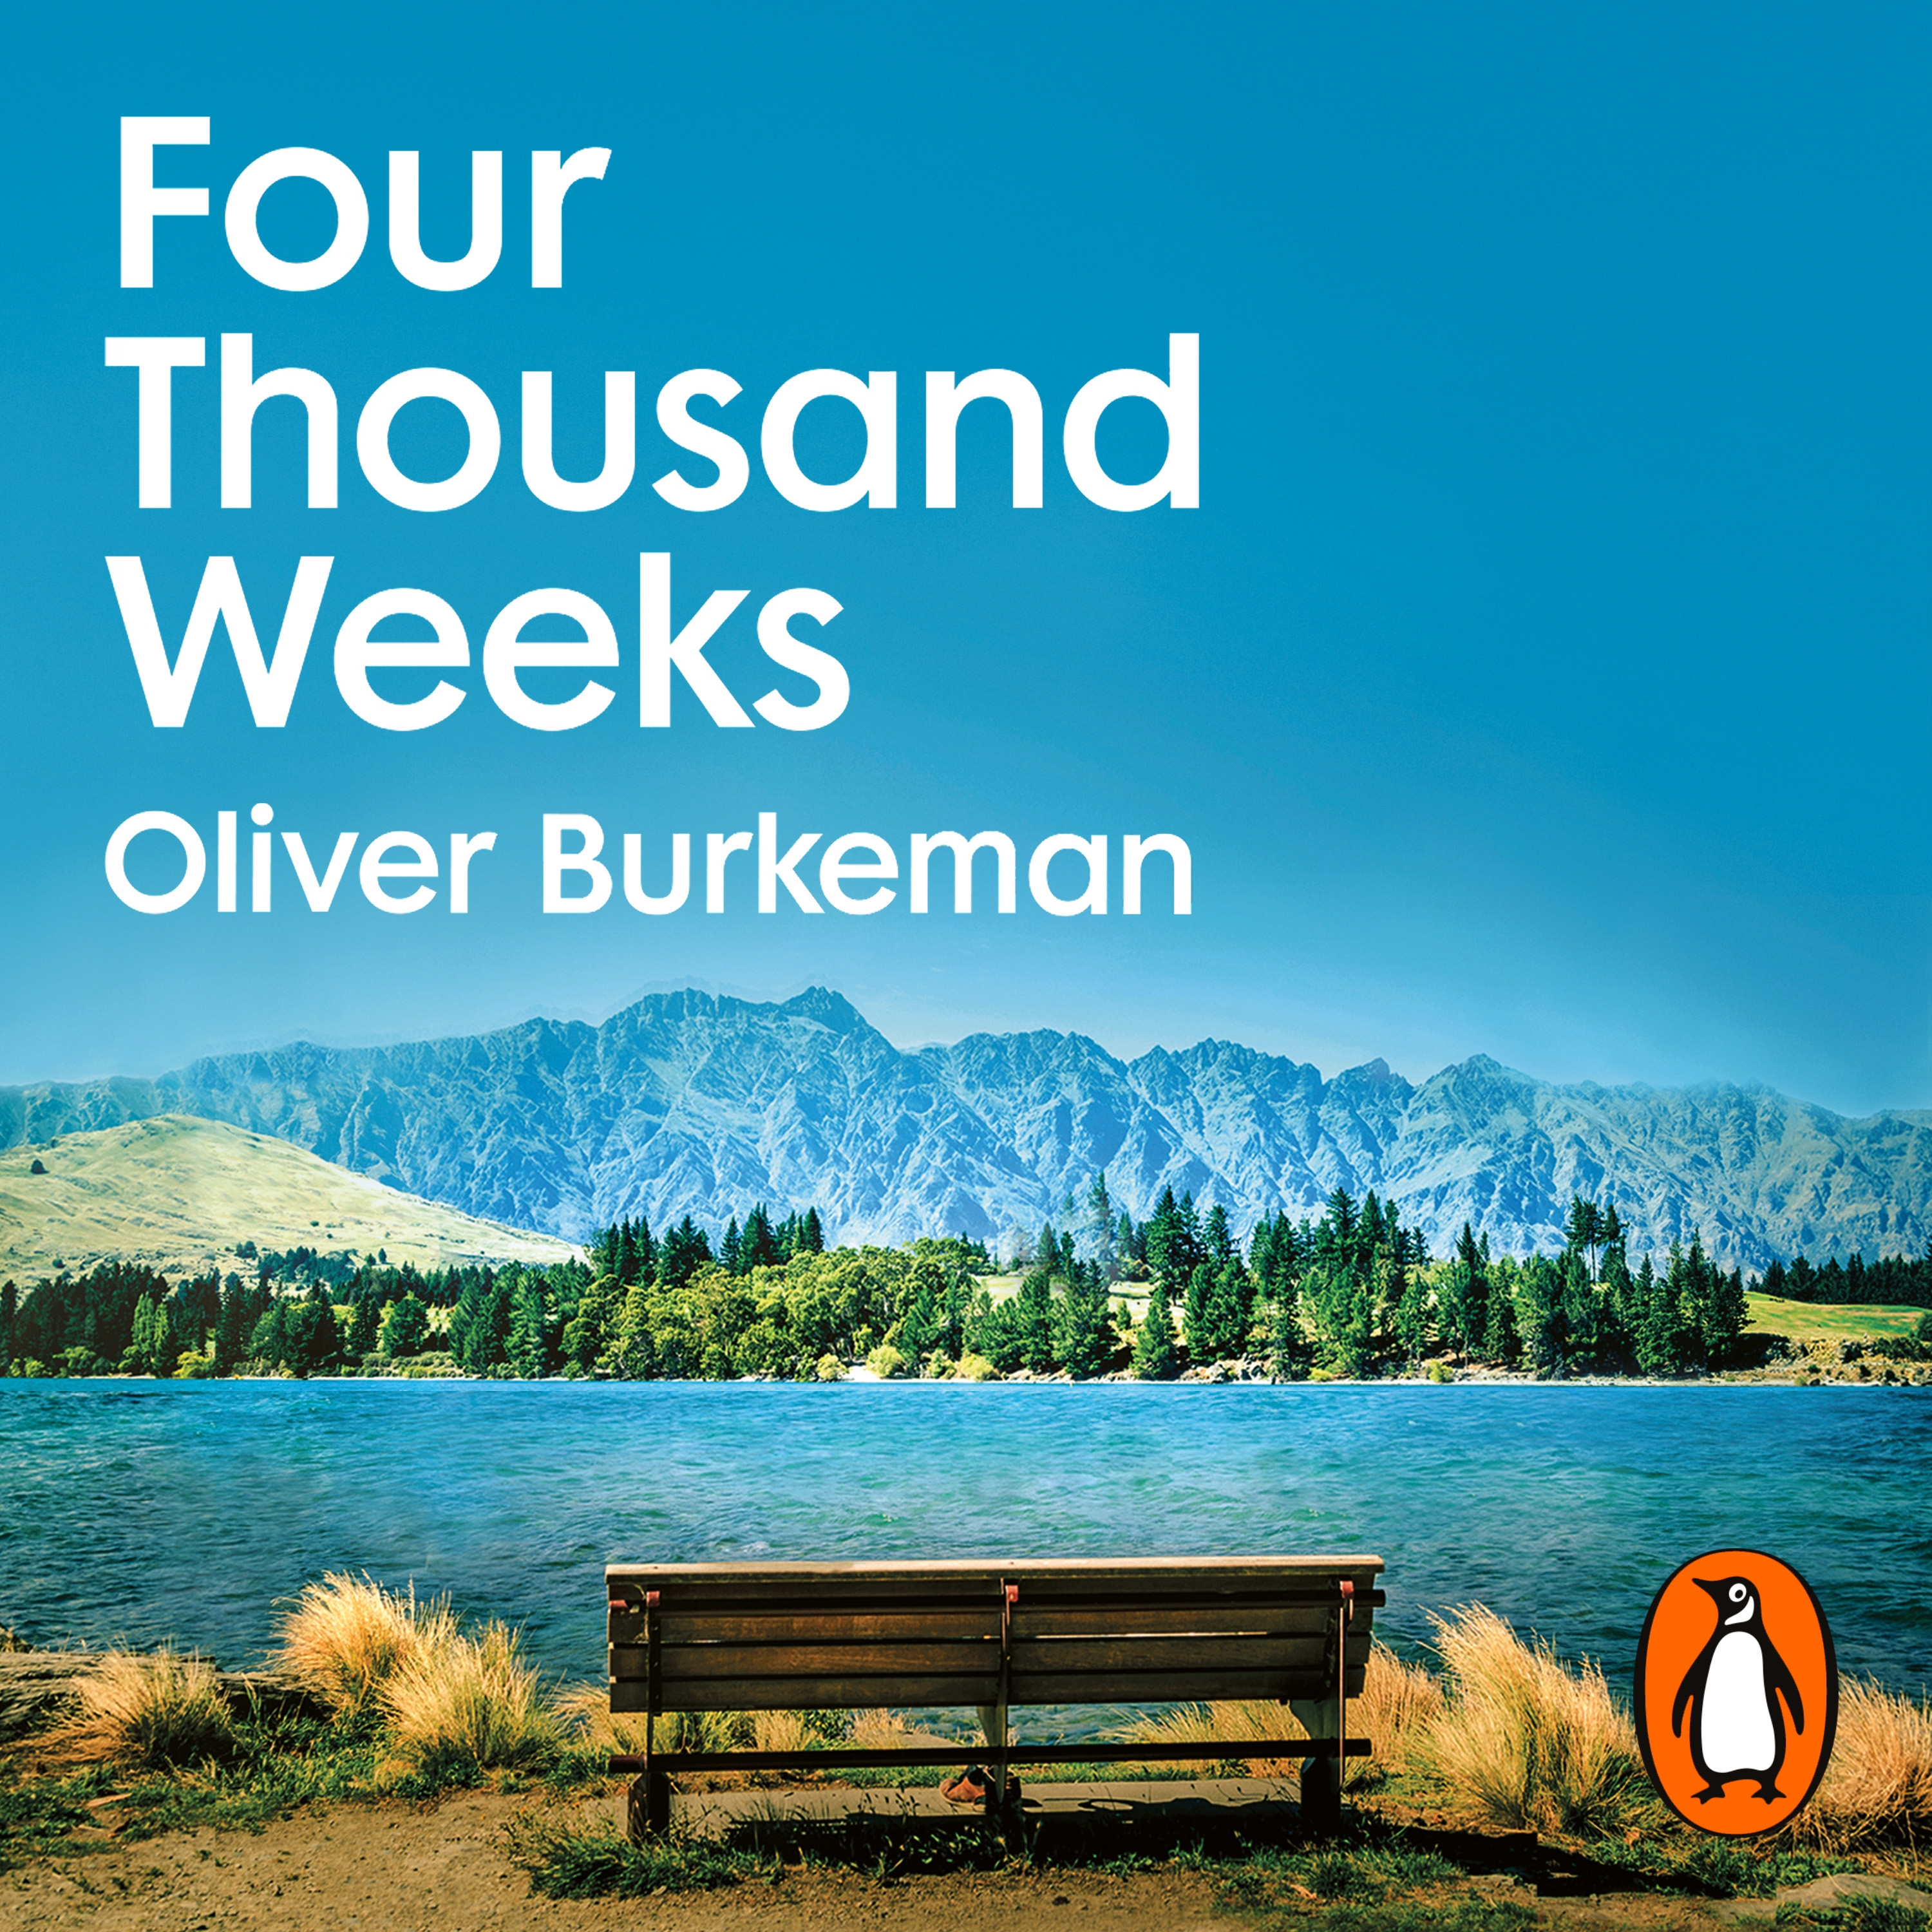 Audiobook image for Four Thousand Weeks: a landscape view with mountains in the background, a lake, and a bench in the foreground. The title and author name are in white at the top.